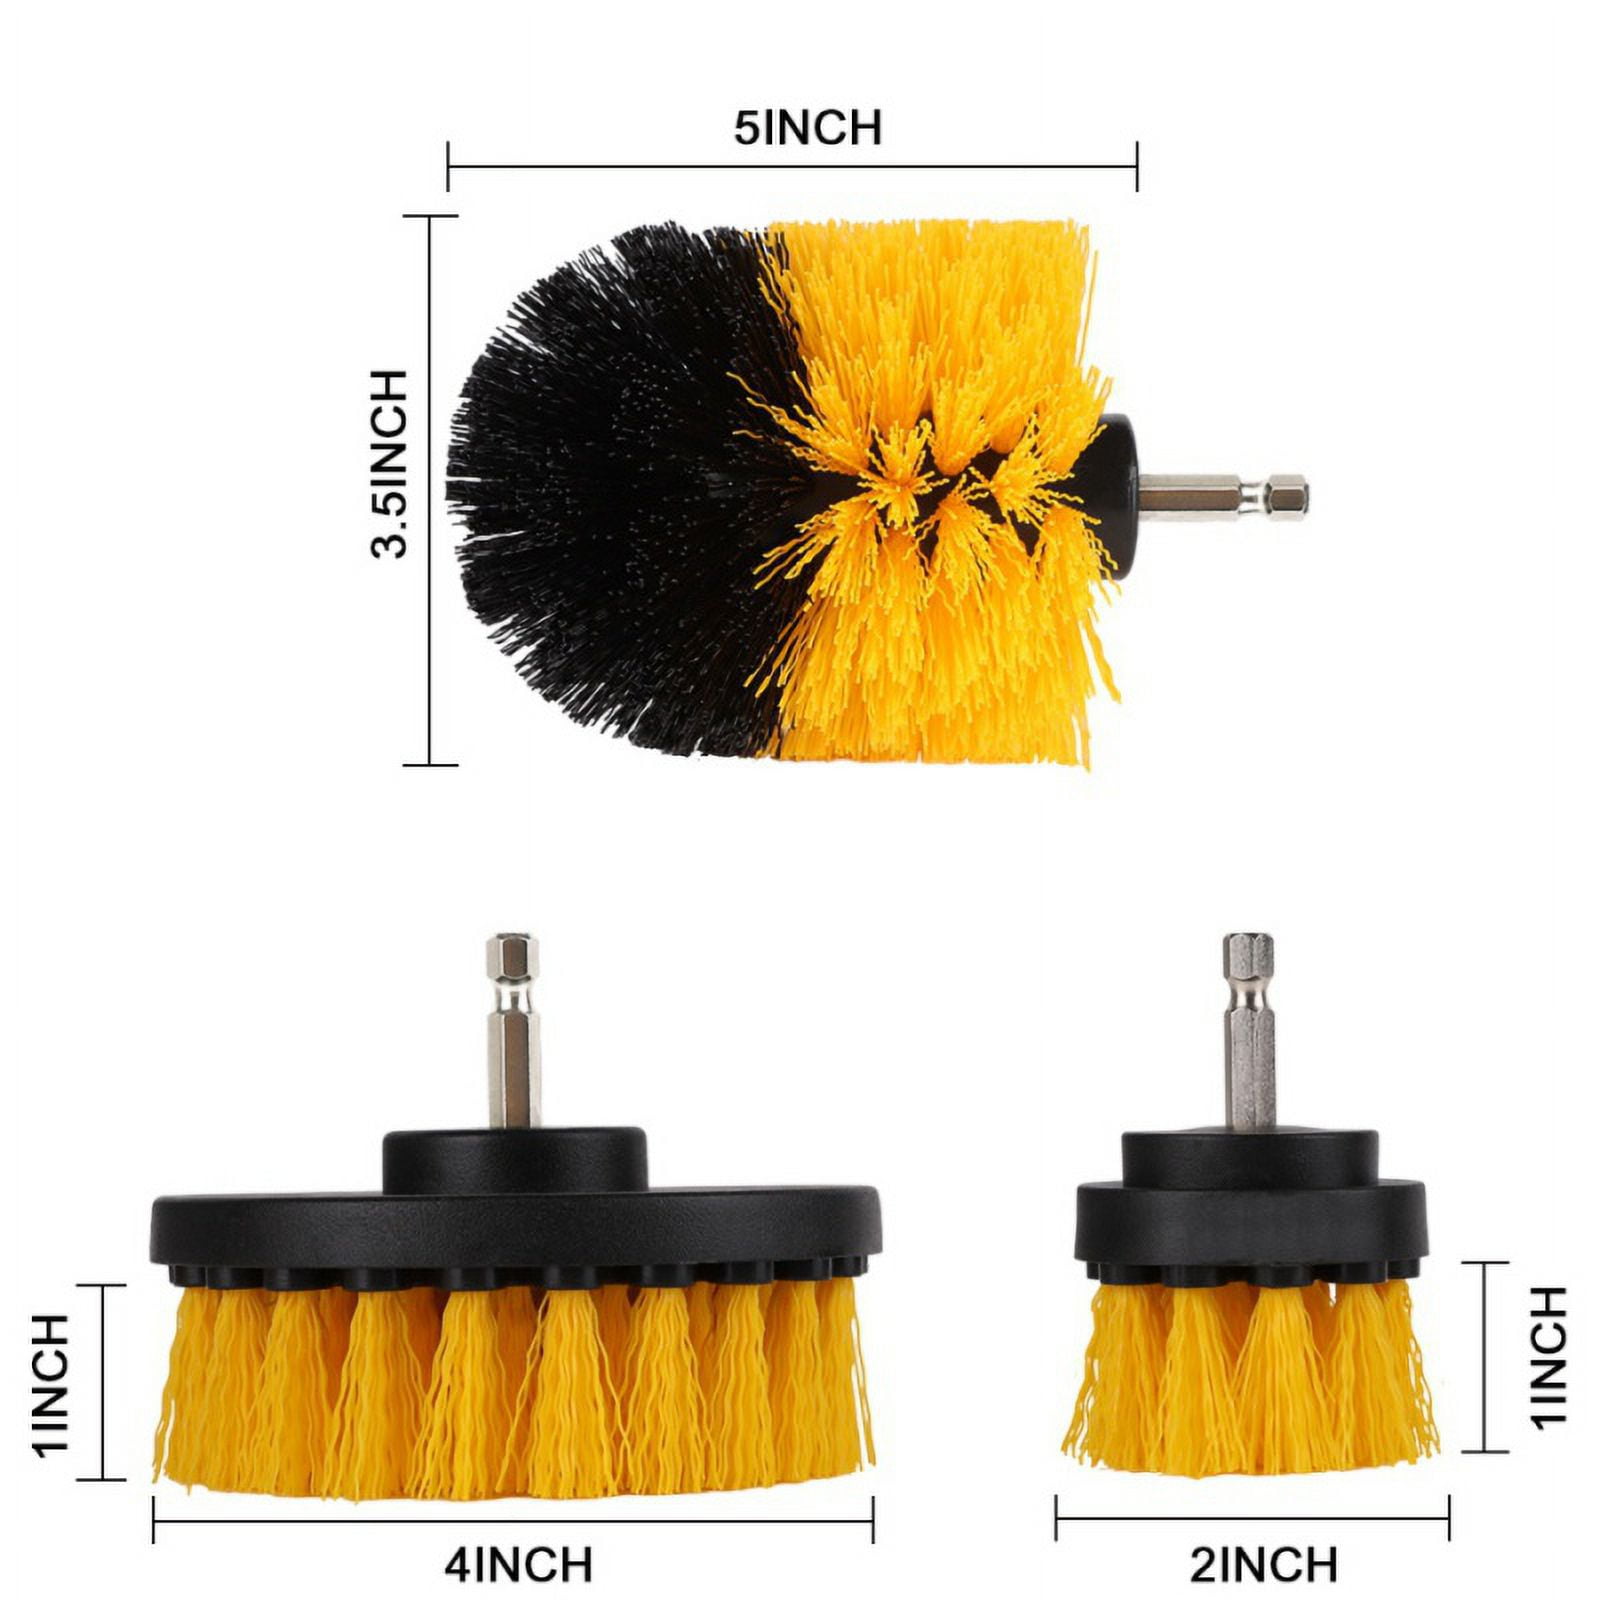 3PACK Hand Bristle Drill Brush Attachment Power Scrubber Set Grout